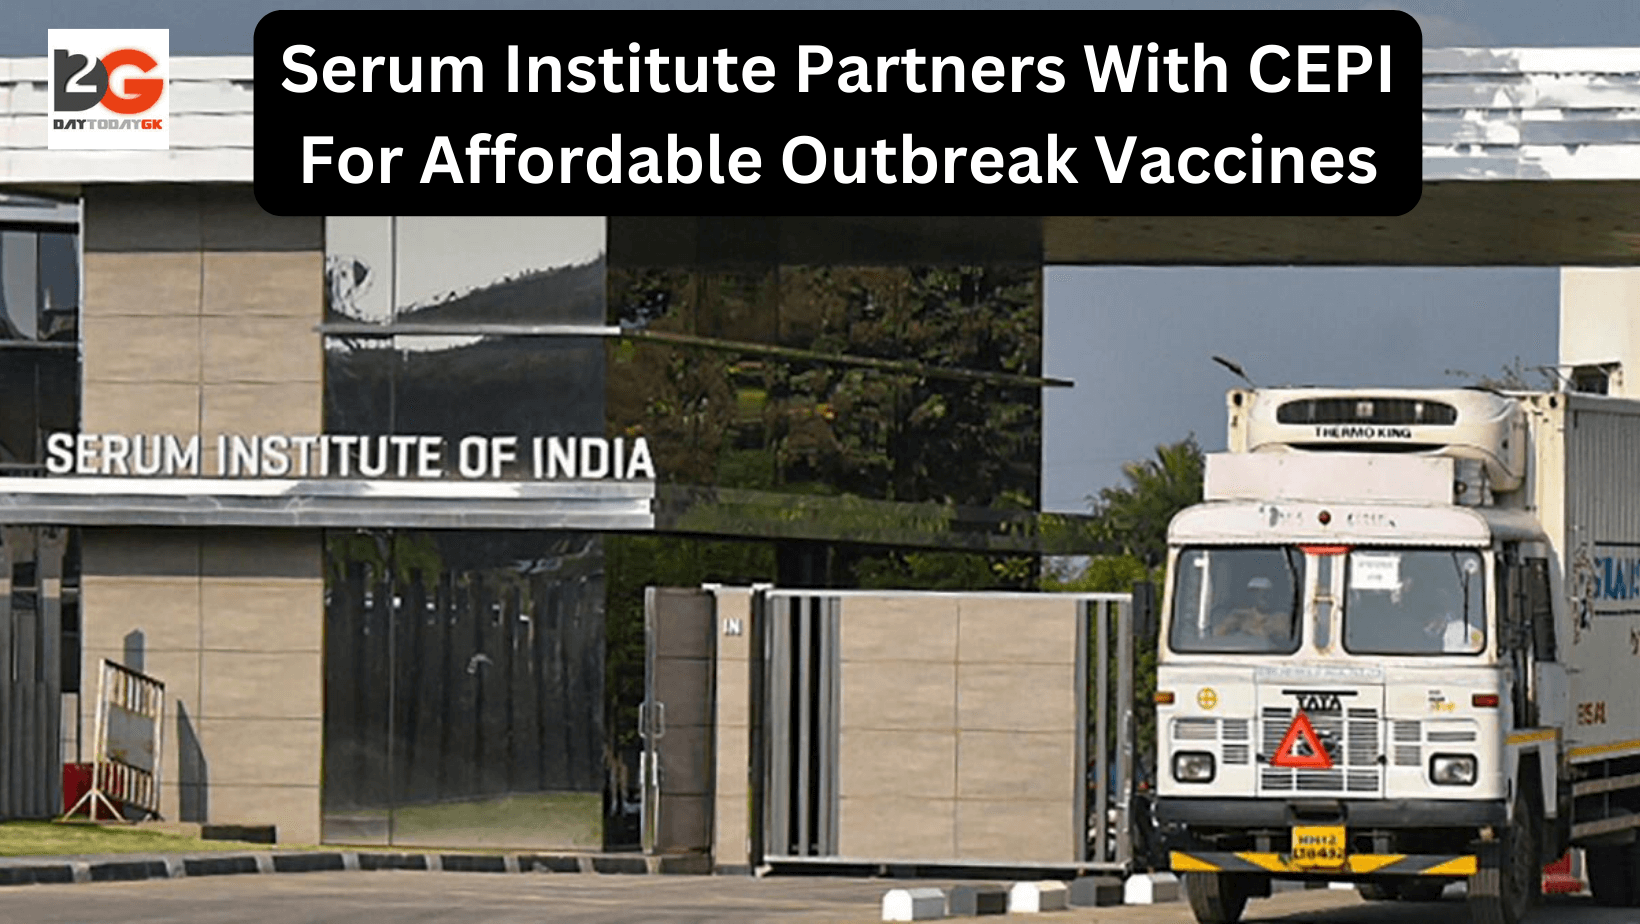 Serum Institute Partners With CEPI For Affordable Outbreak Vaccines